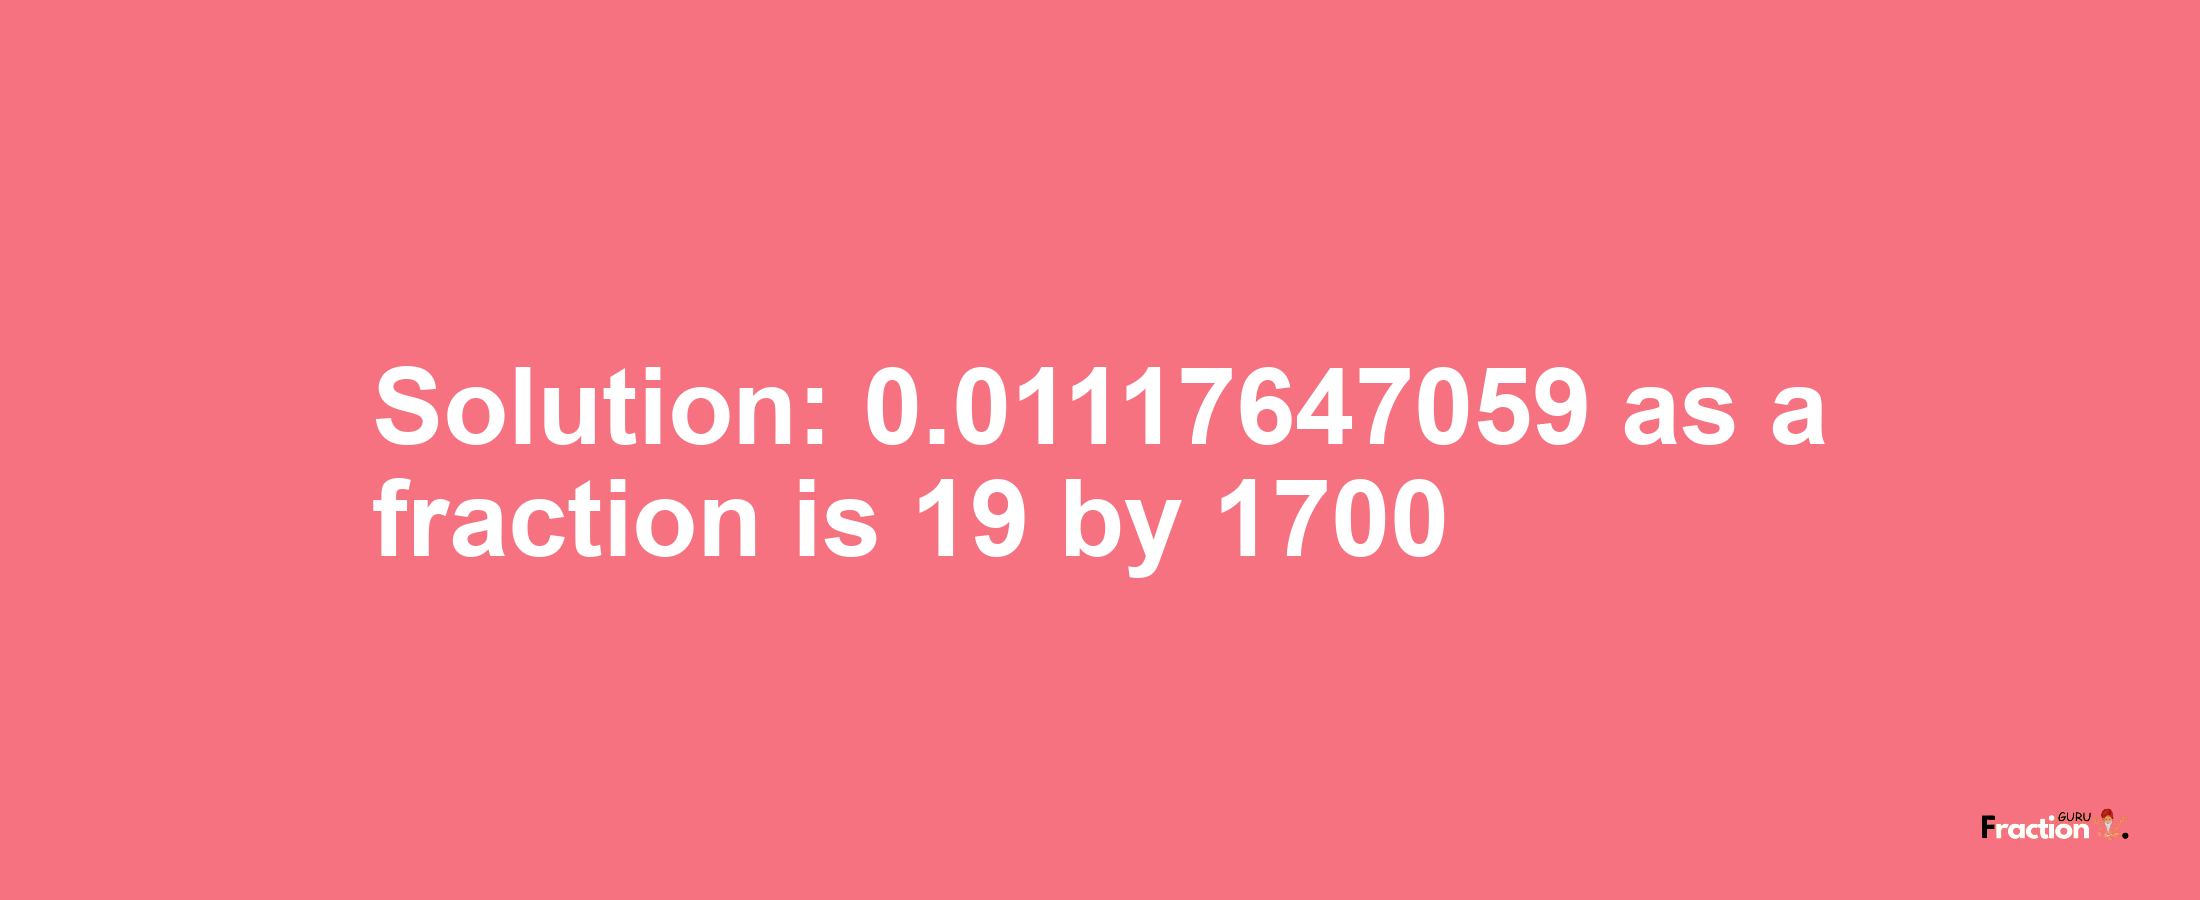 Solution:0.01117647059 as a fraction is 19/1700